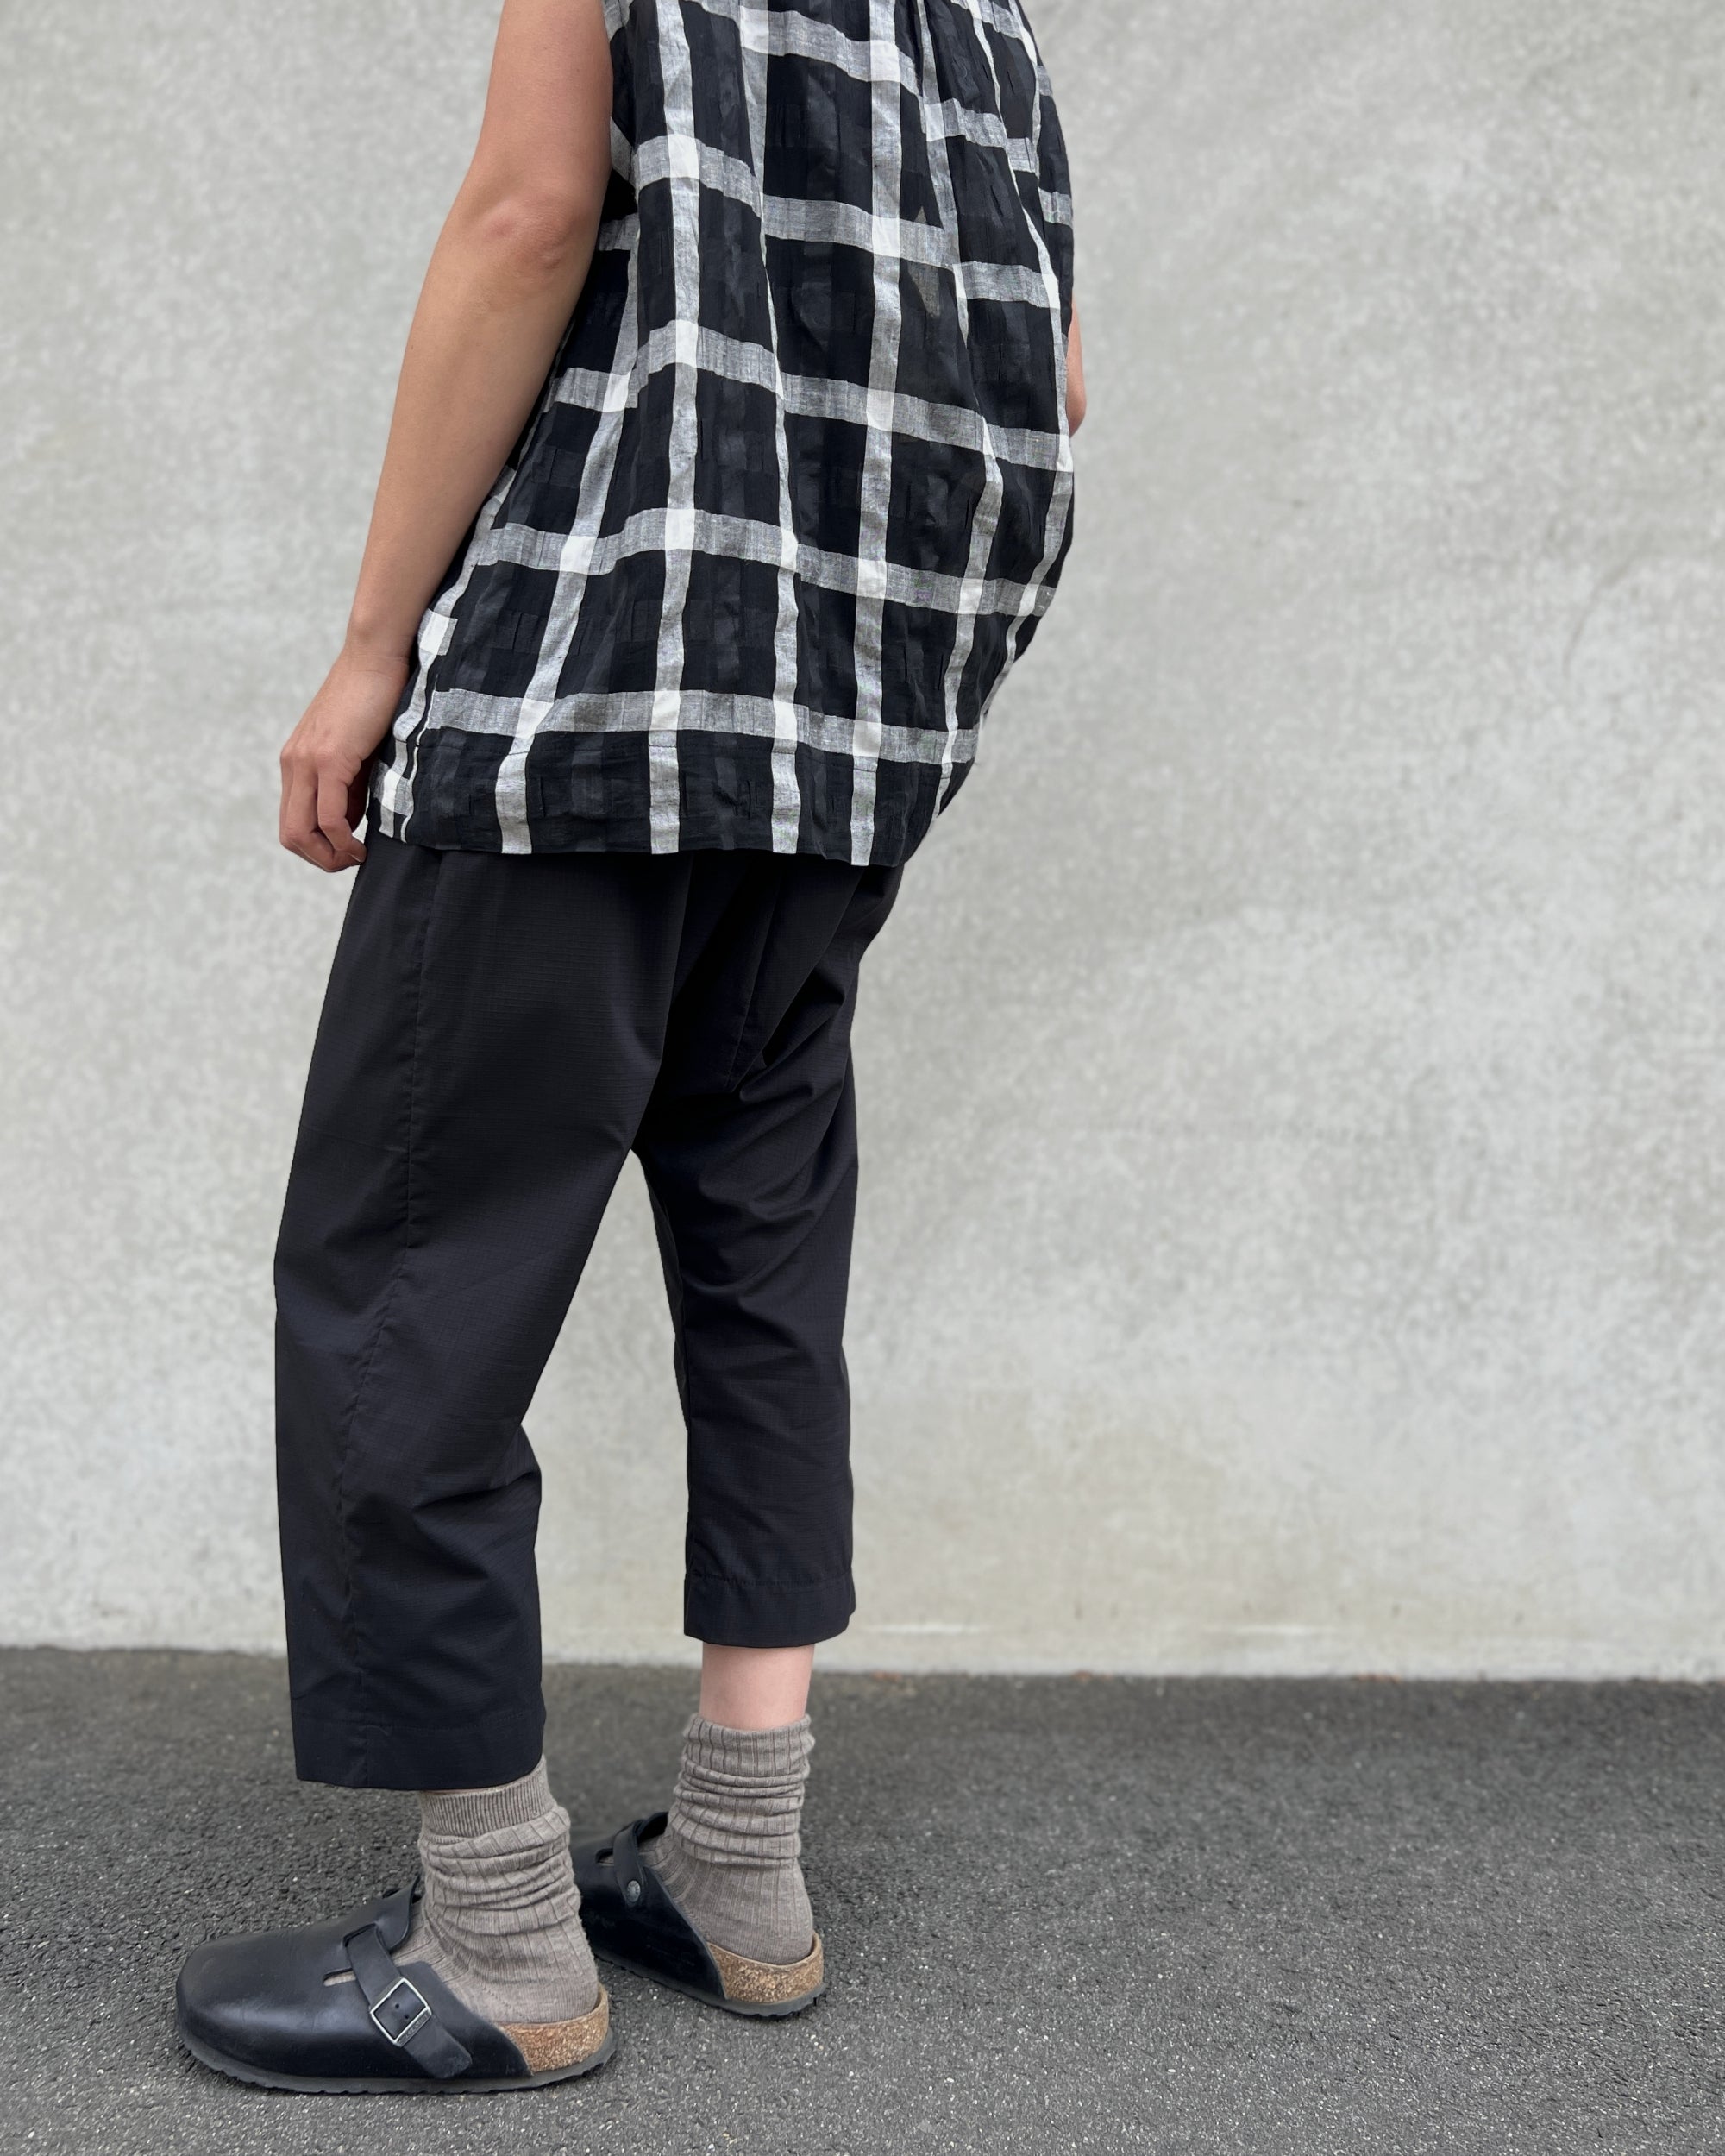 LJ struthers : fine textural check pants